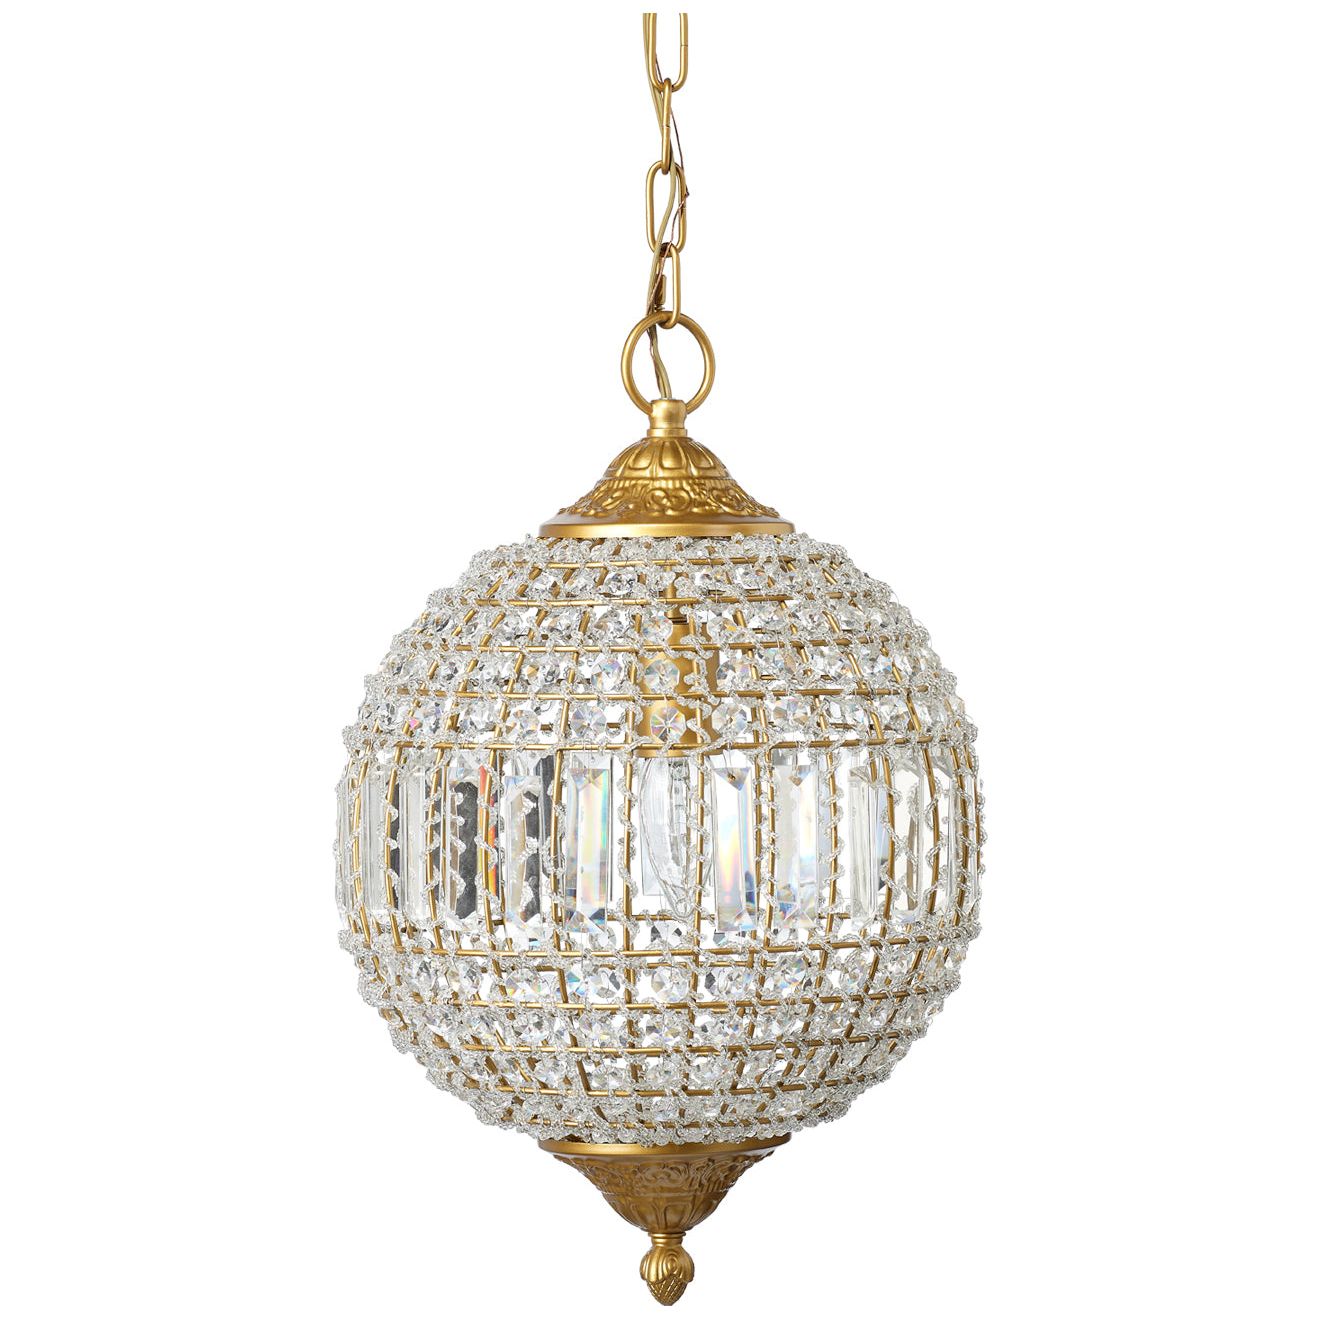 Jamie Young Company - LS5CRYSTCLAG - Crystal Orb Pendant - Crystal - Antique Gold